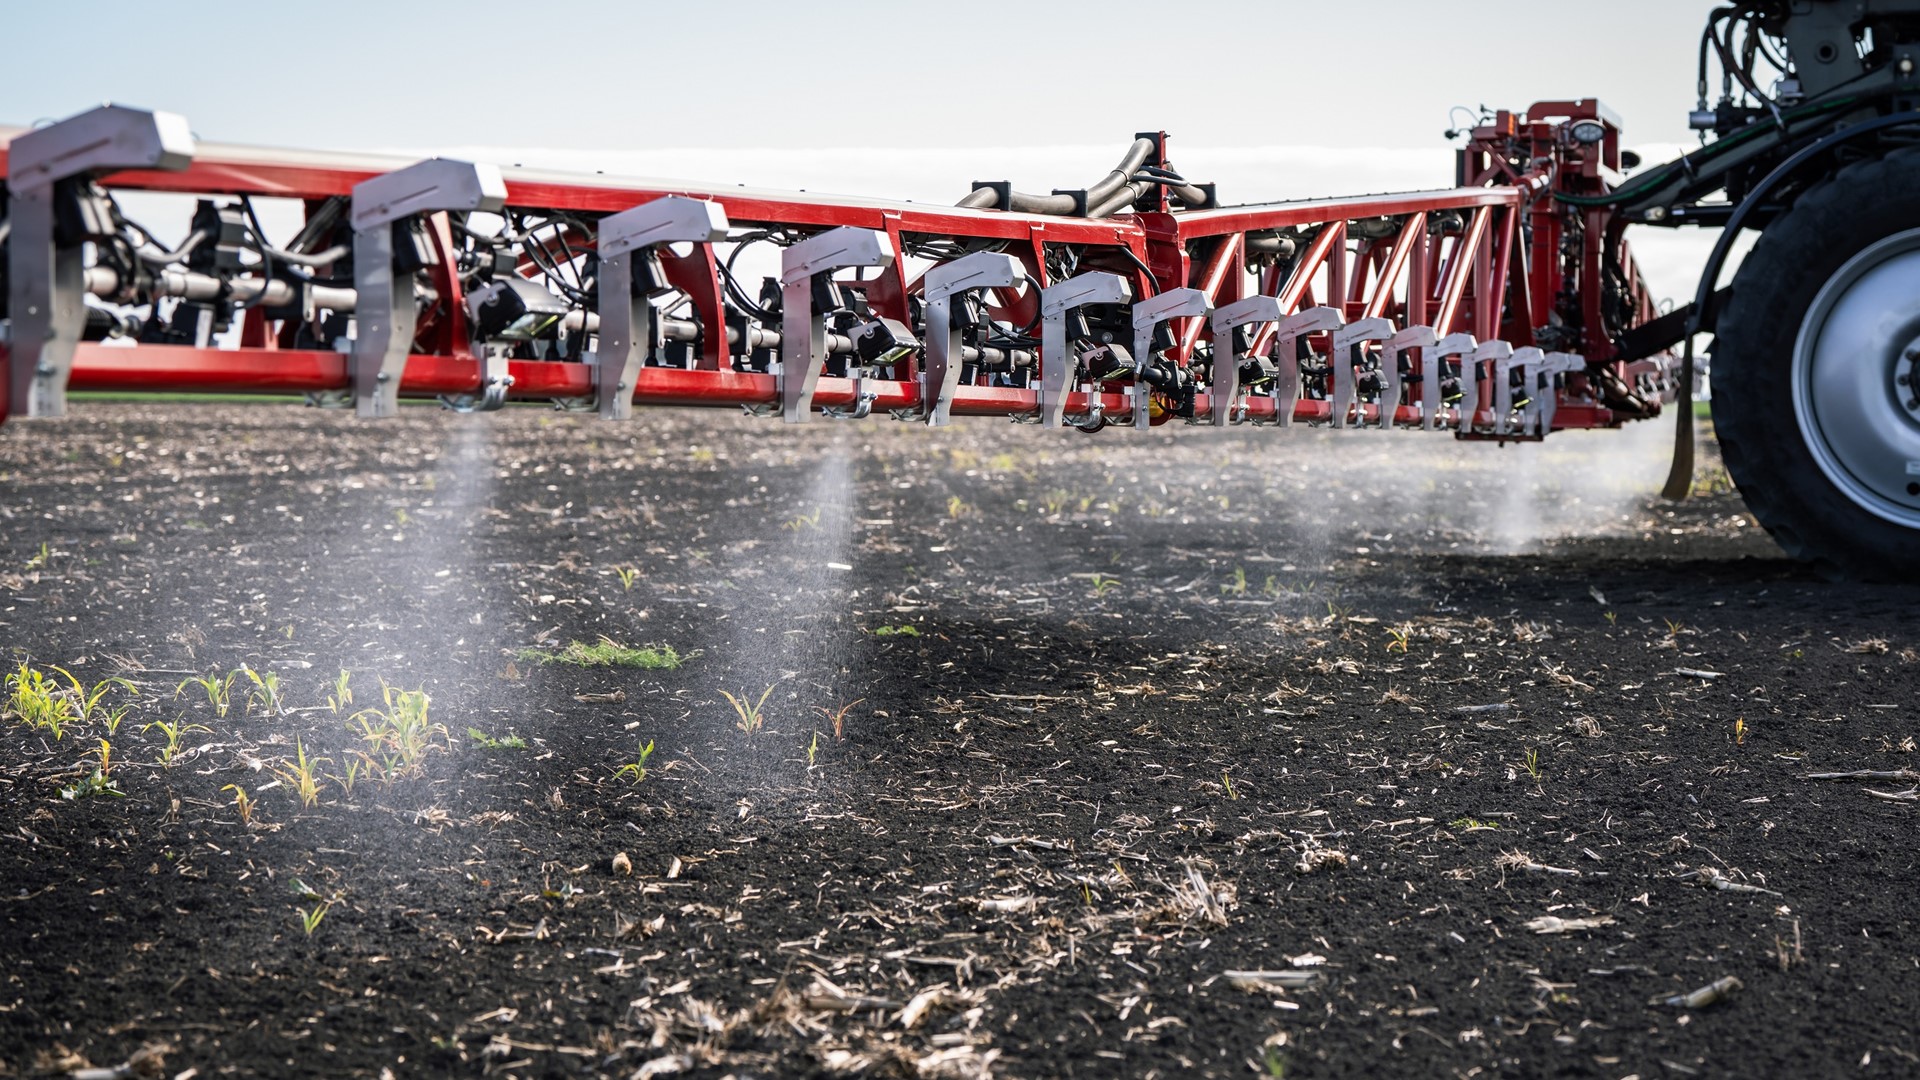 New spray technology for Case IH Patriot 50 series makes sense for increased efficiency savings